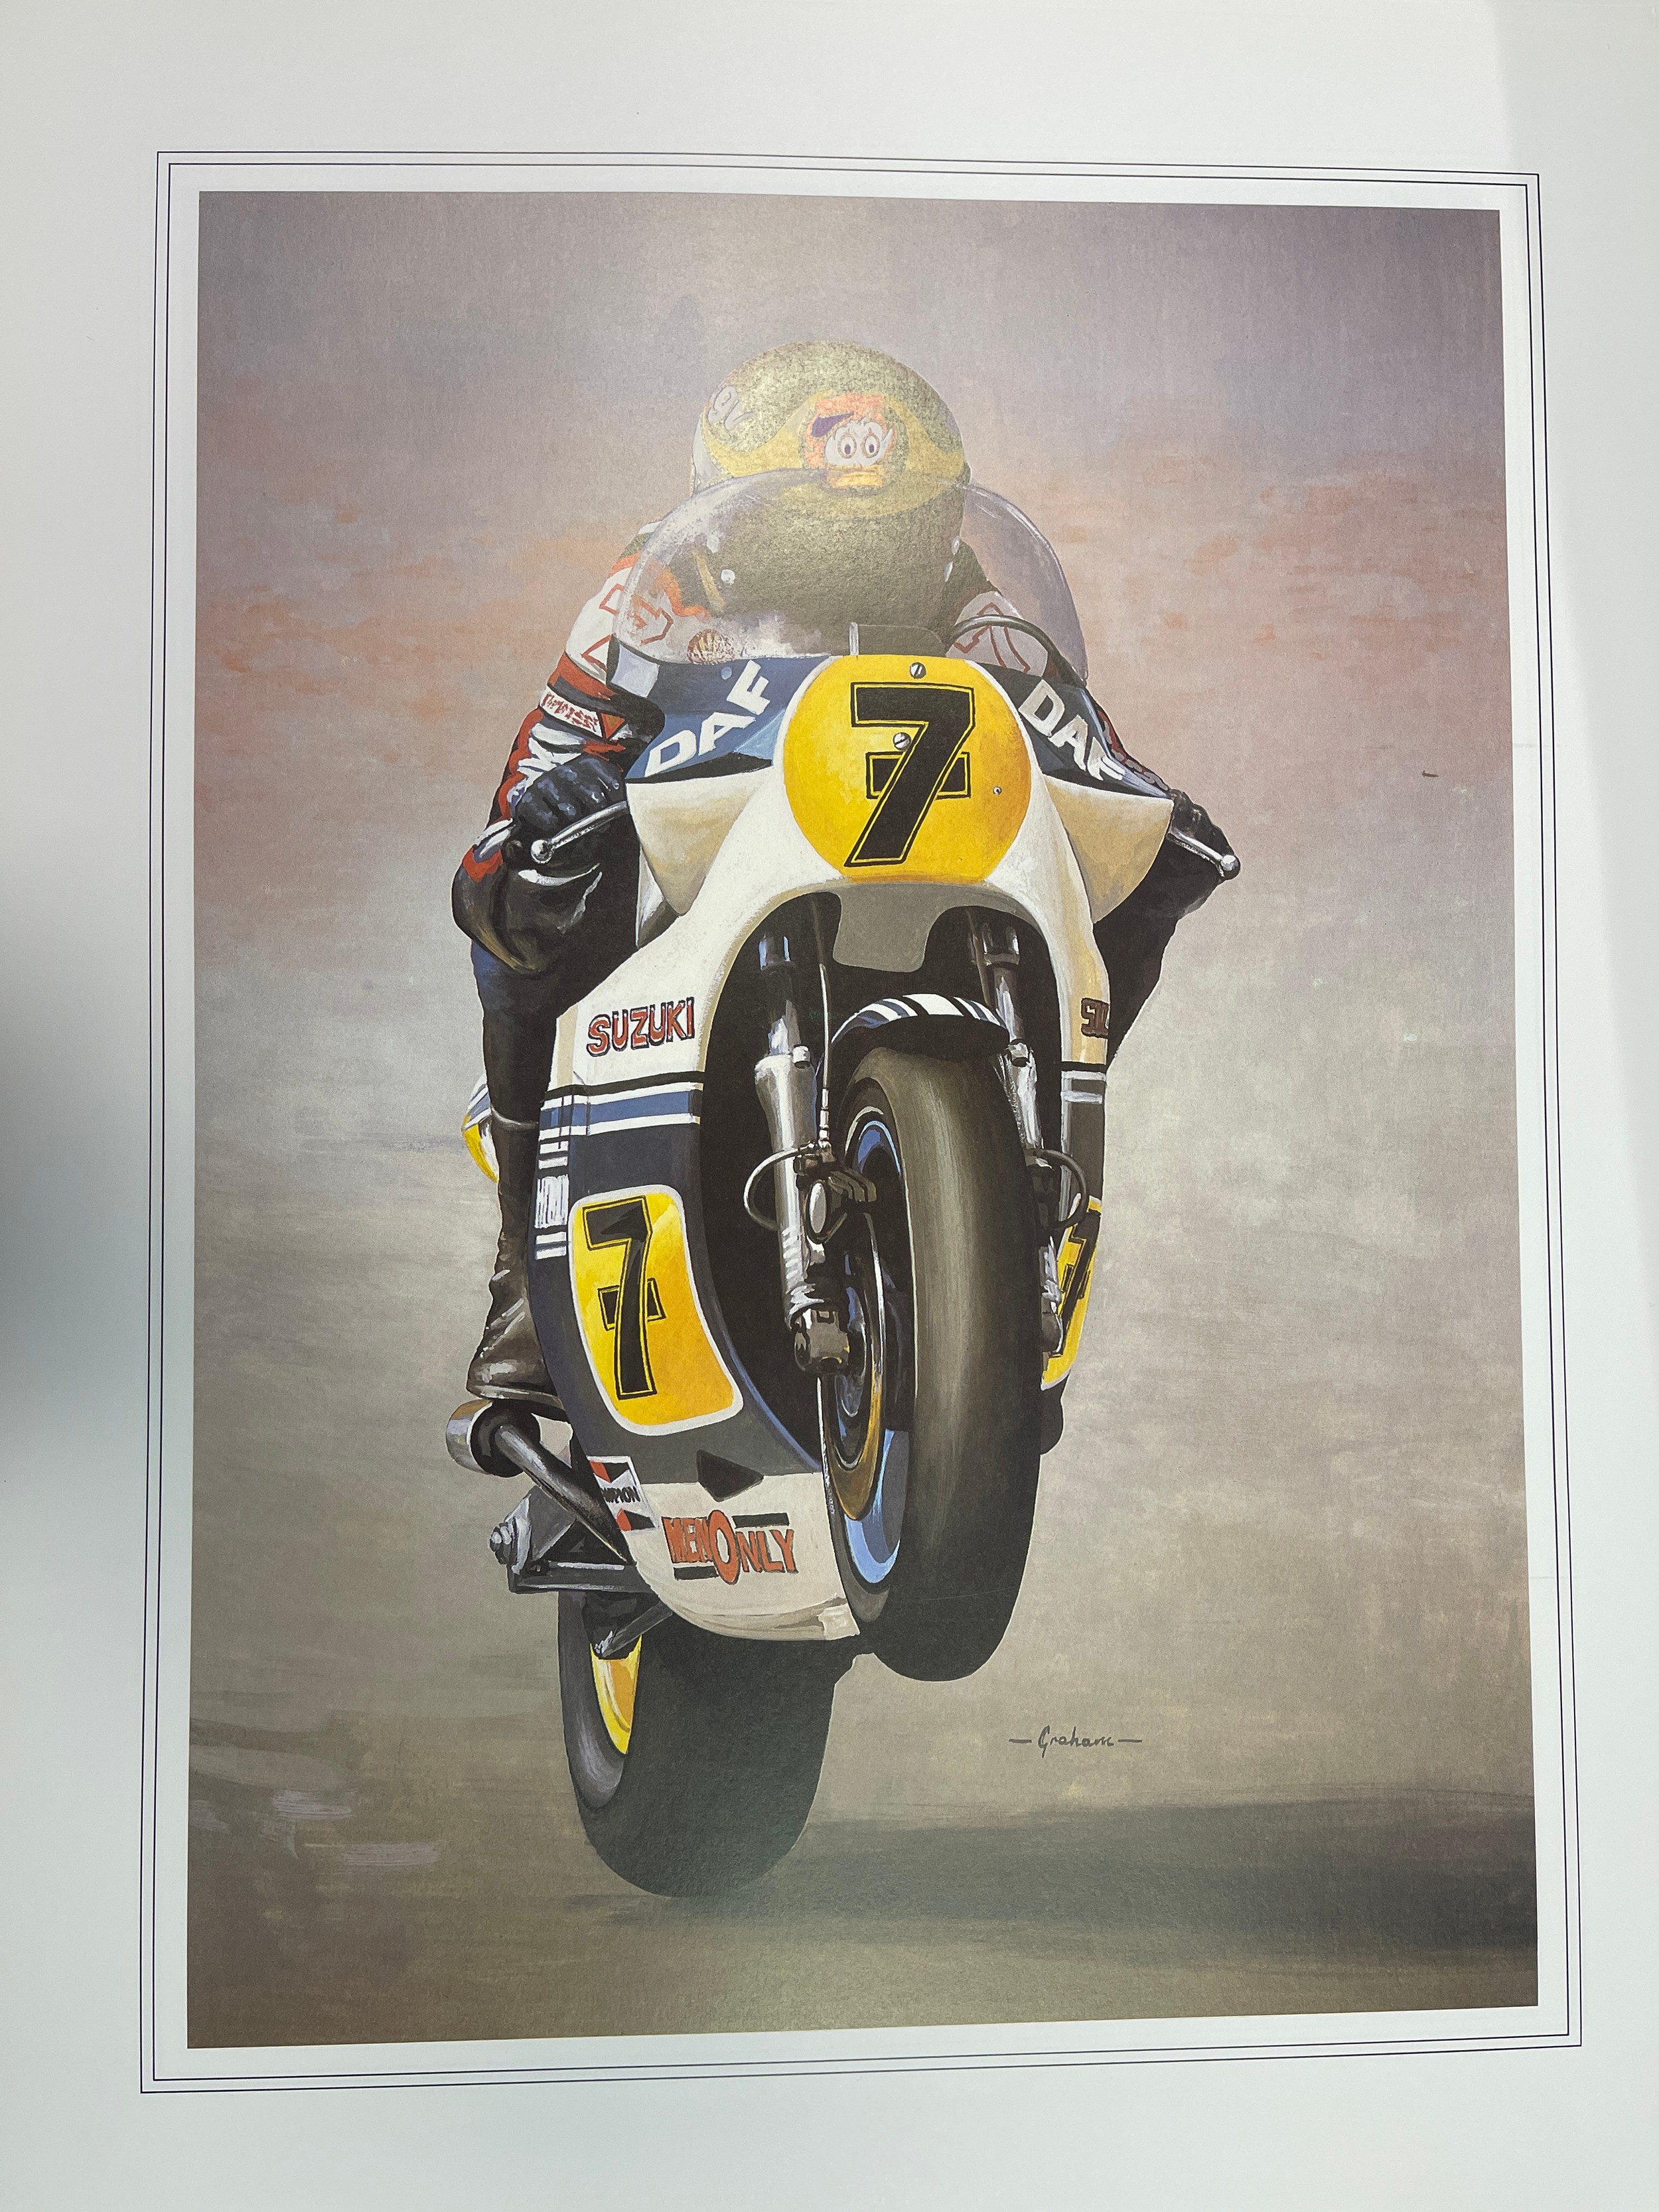 A group of prints by Steve Craner and Tony Graham, including Mick Grant on Suzuki, Barry Sheene on - Image 2 of 5